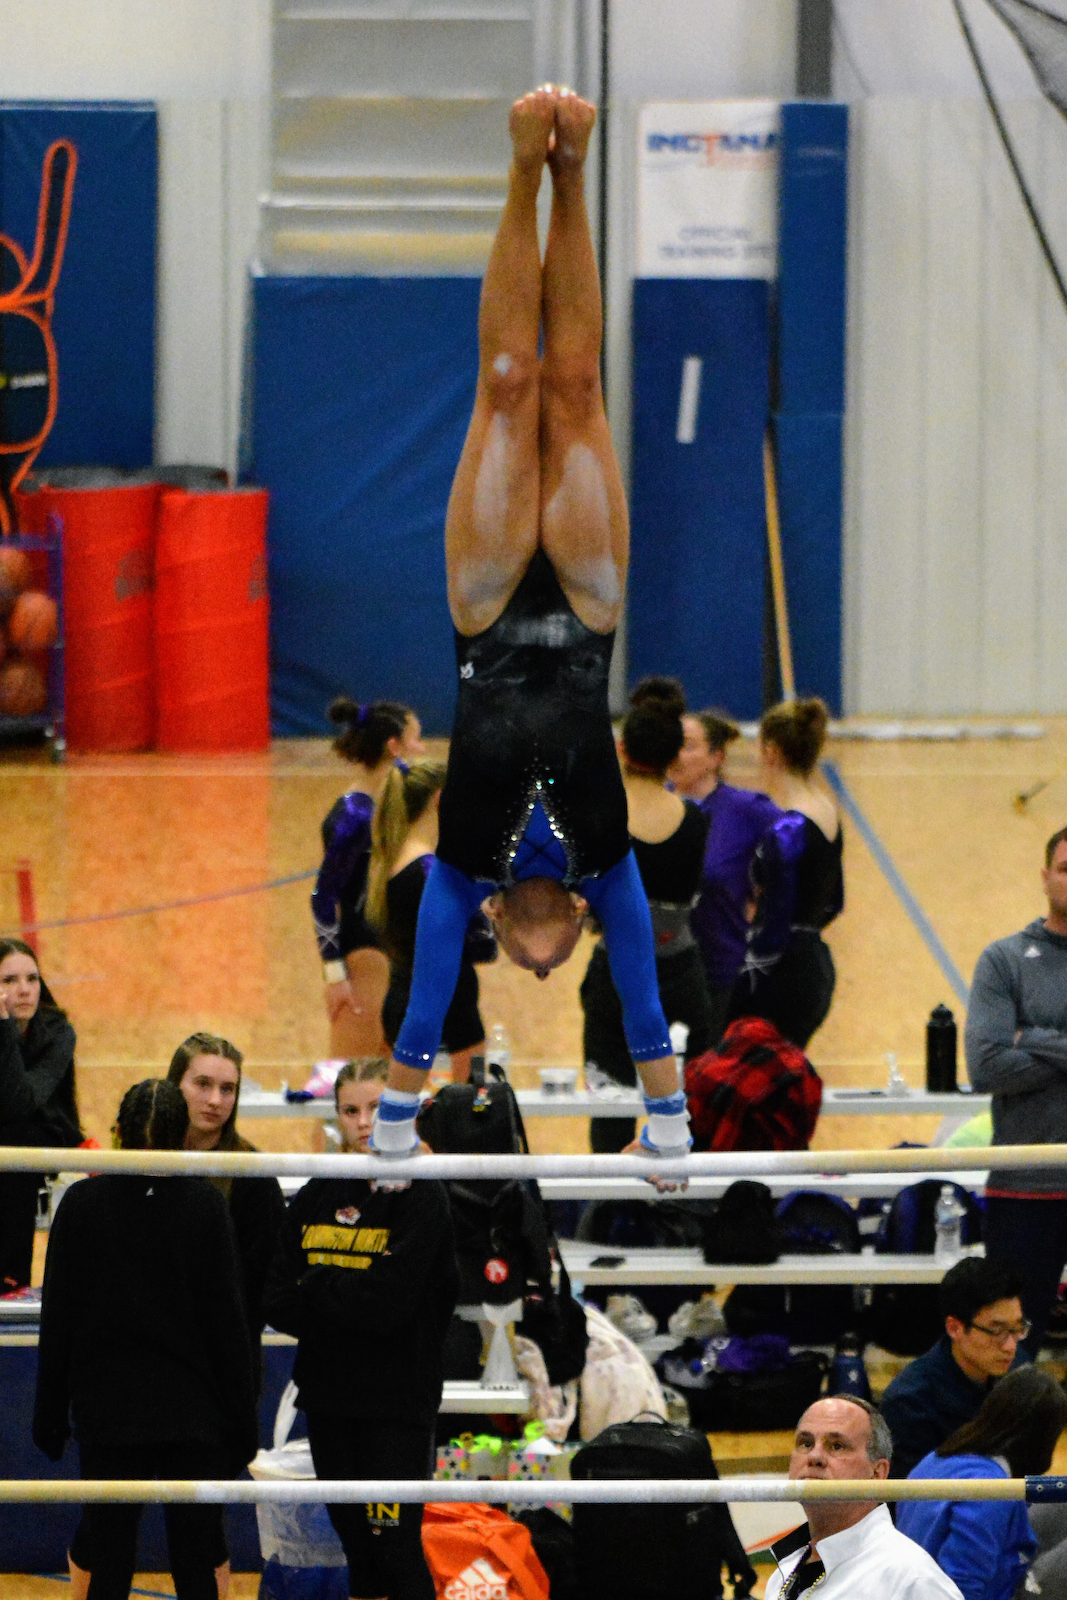 Gymnasts advance to Regionals with runners-up finish at Franklin Central Sectional cover photo